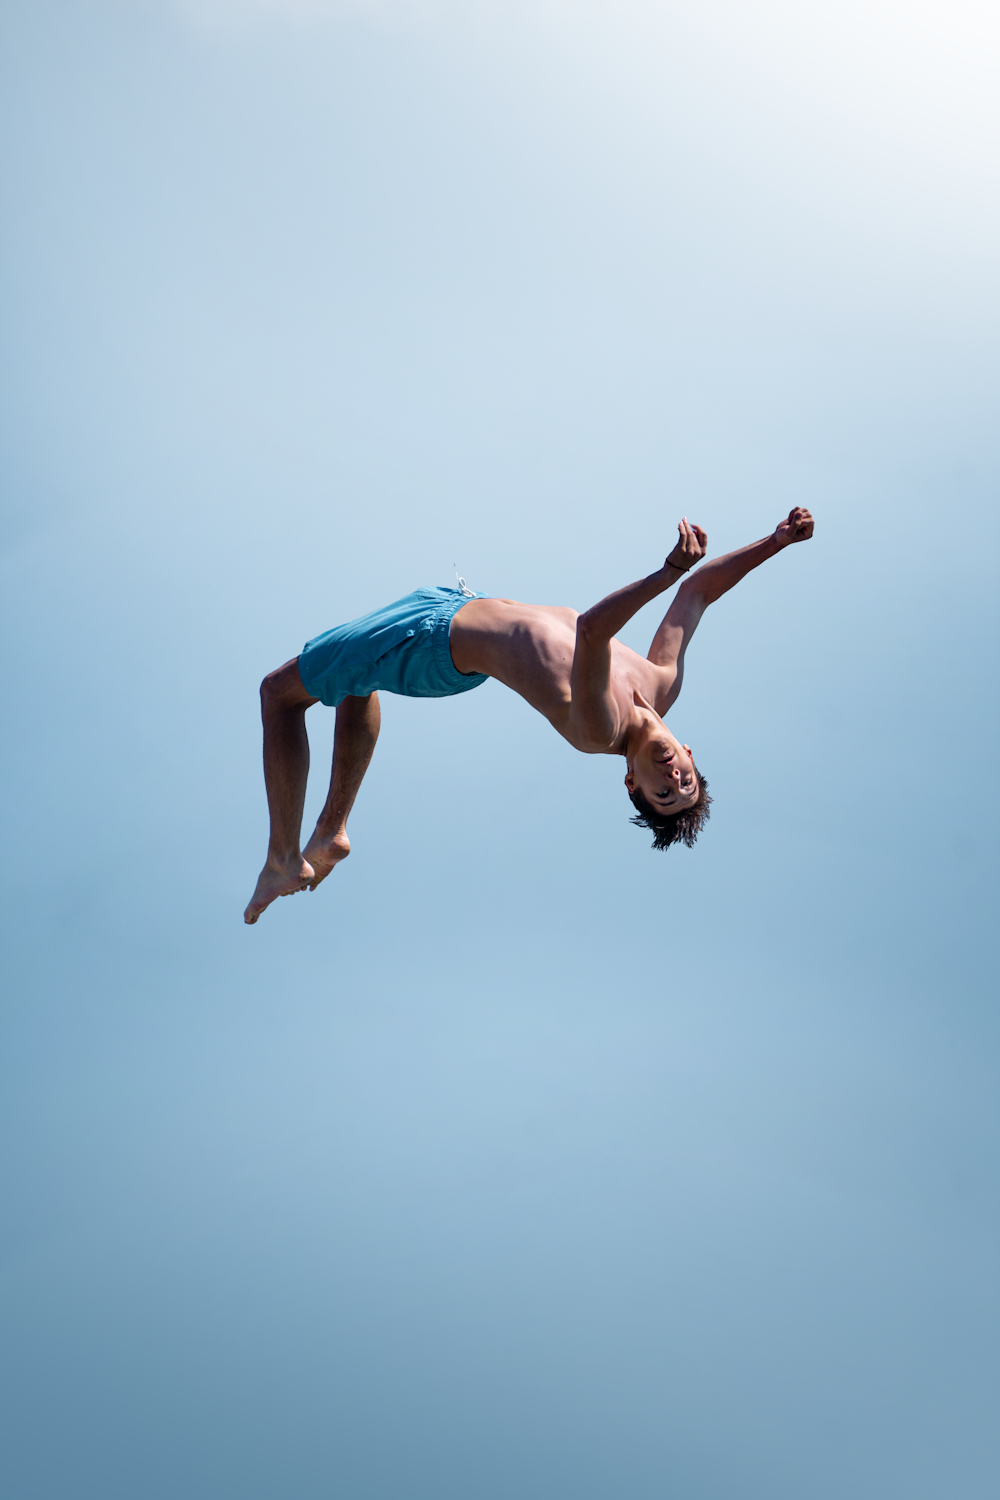 a man in the air doing a trick on a surfboard